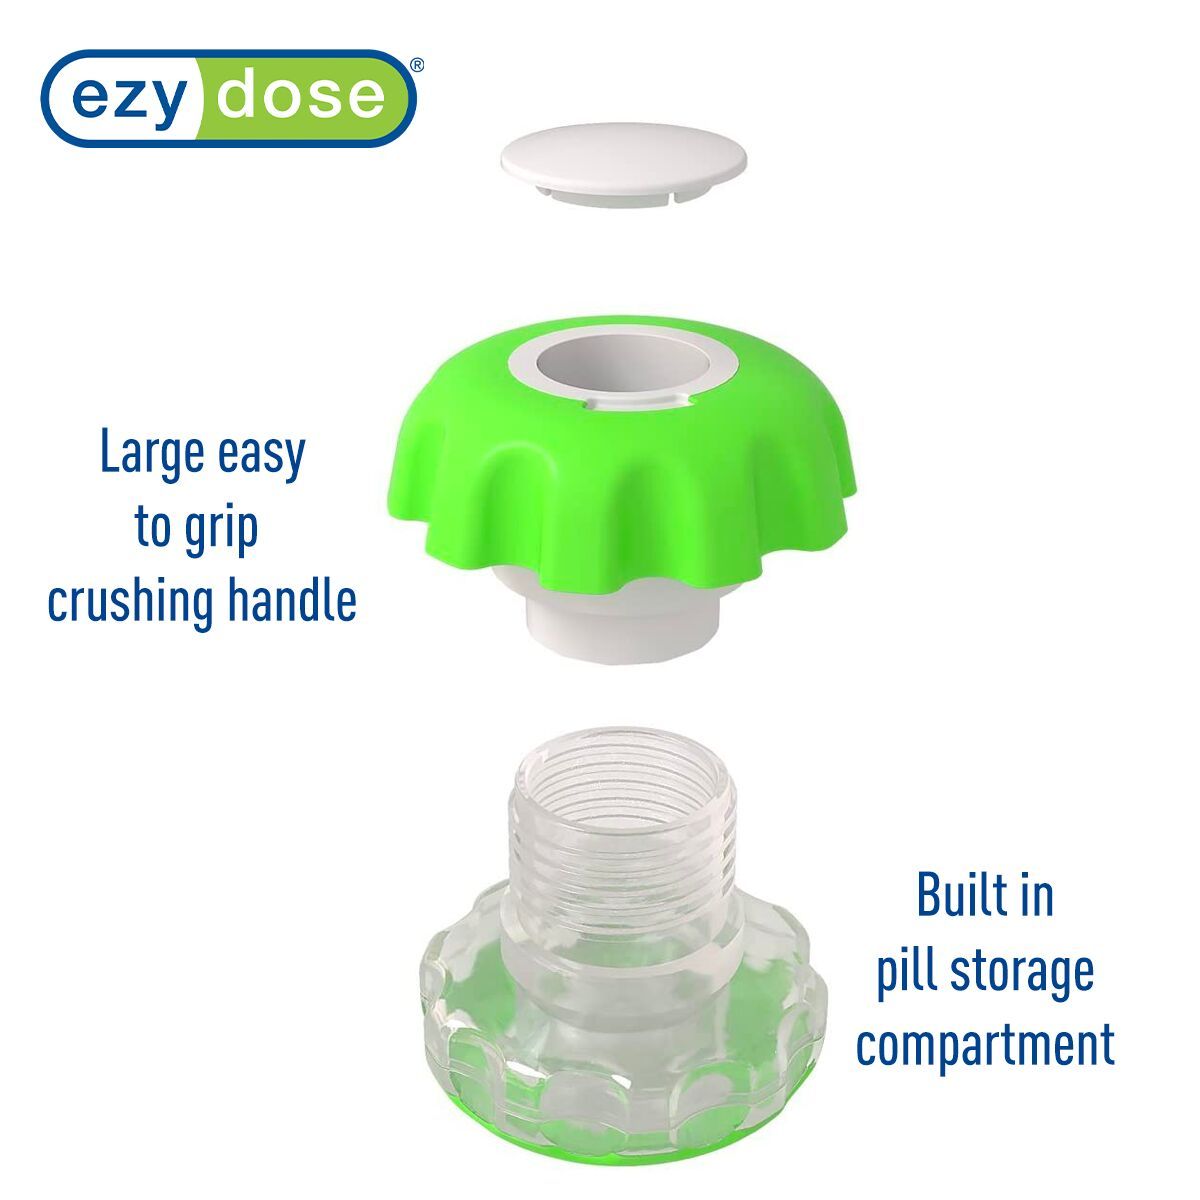 Pill crusher has larger easy to grip crushing handle and built in storage compartment